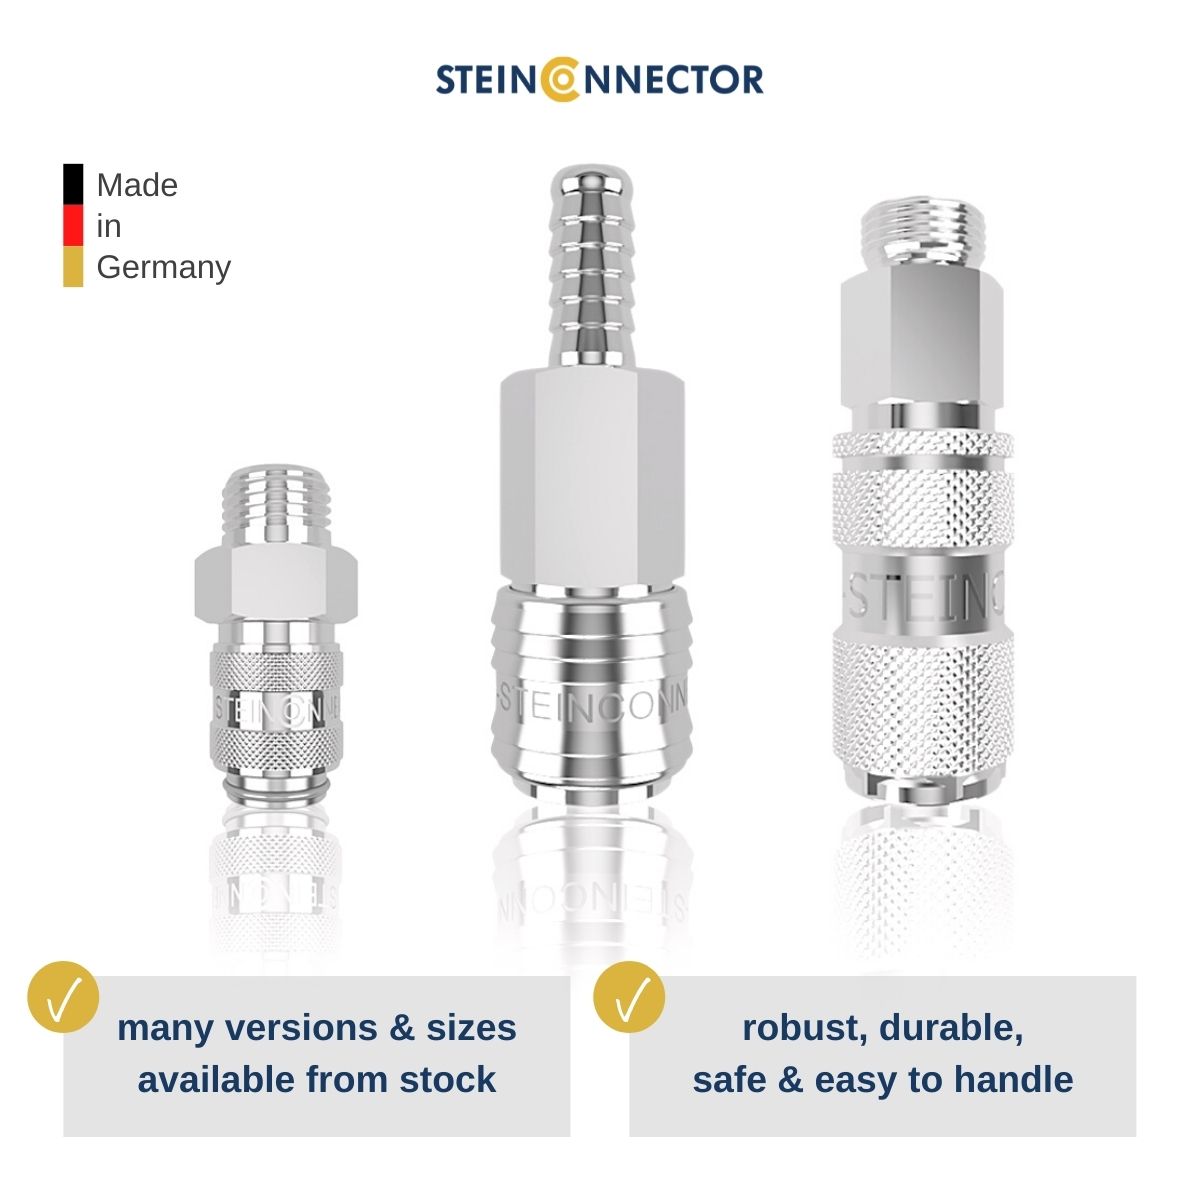 steinconnector pneumatic coupling pneumatic coupling safety coupling quick coupling quick coupling manufacturer germany